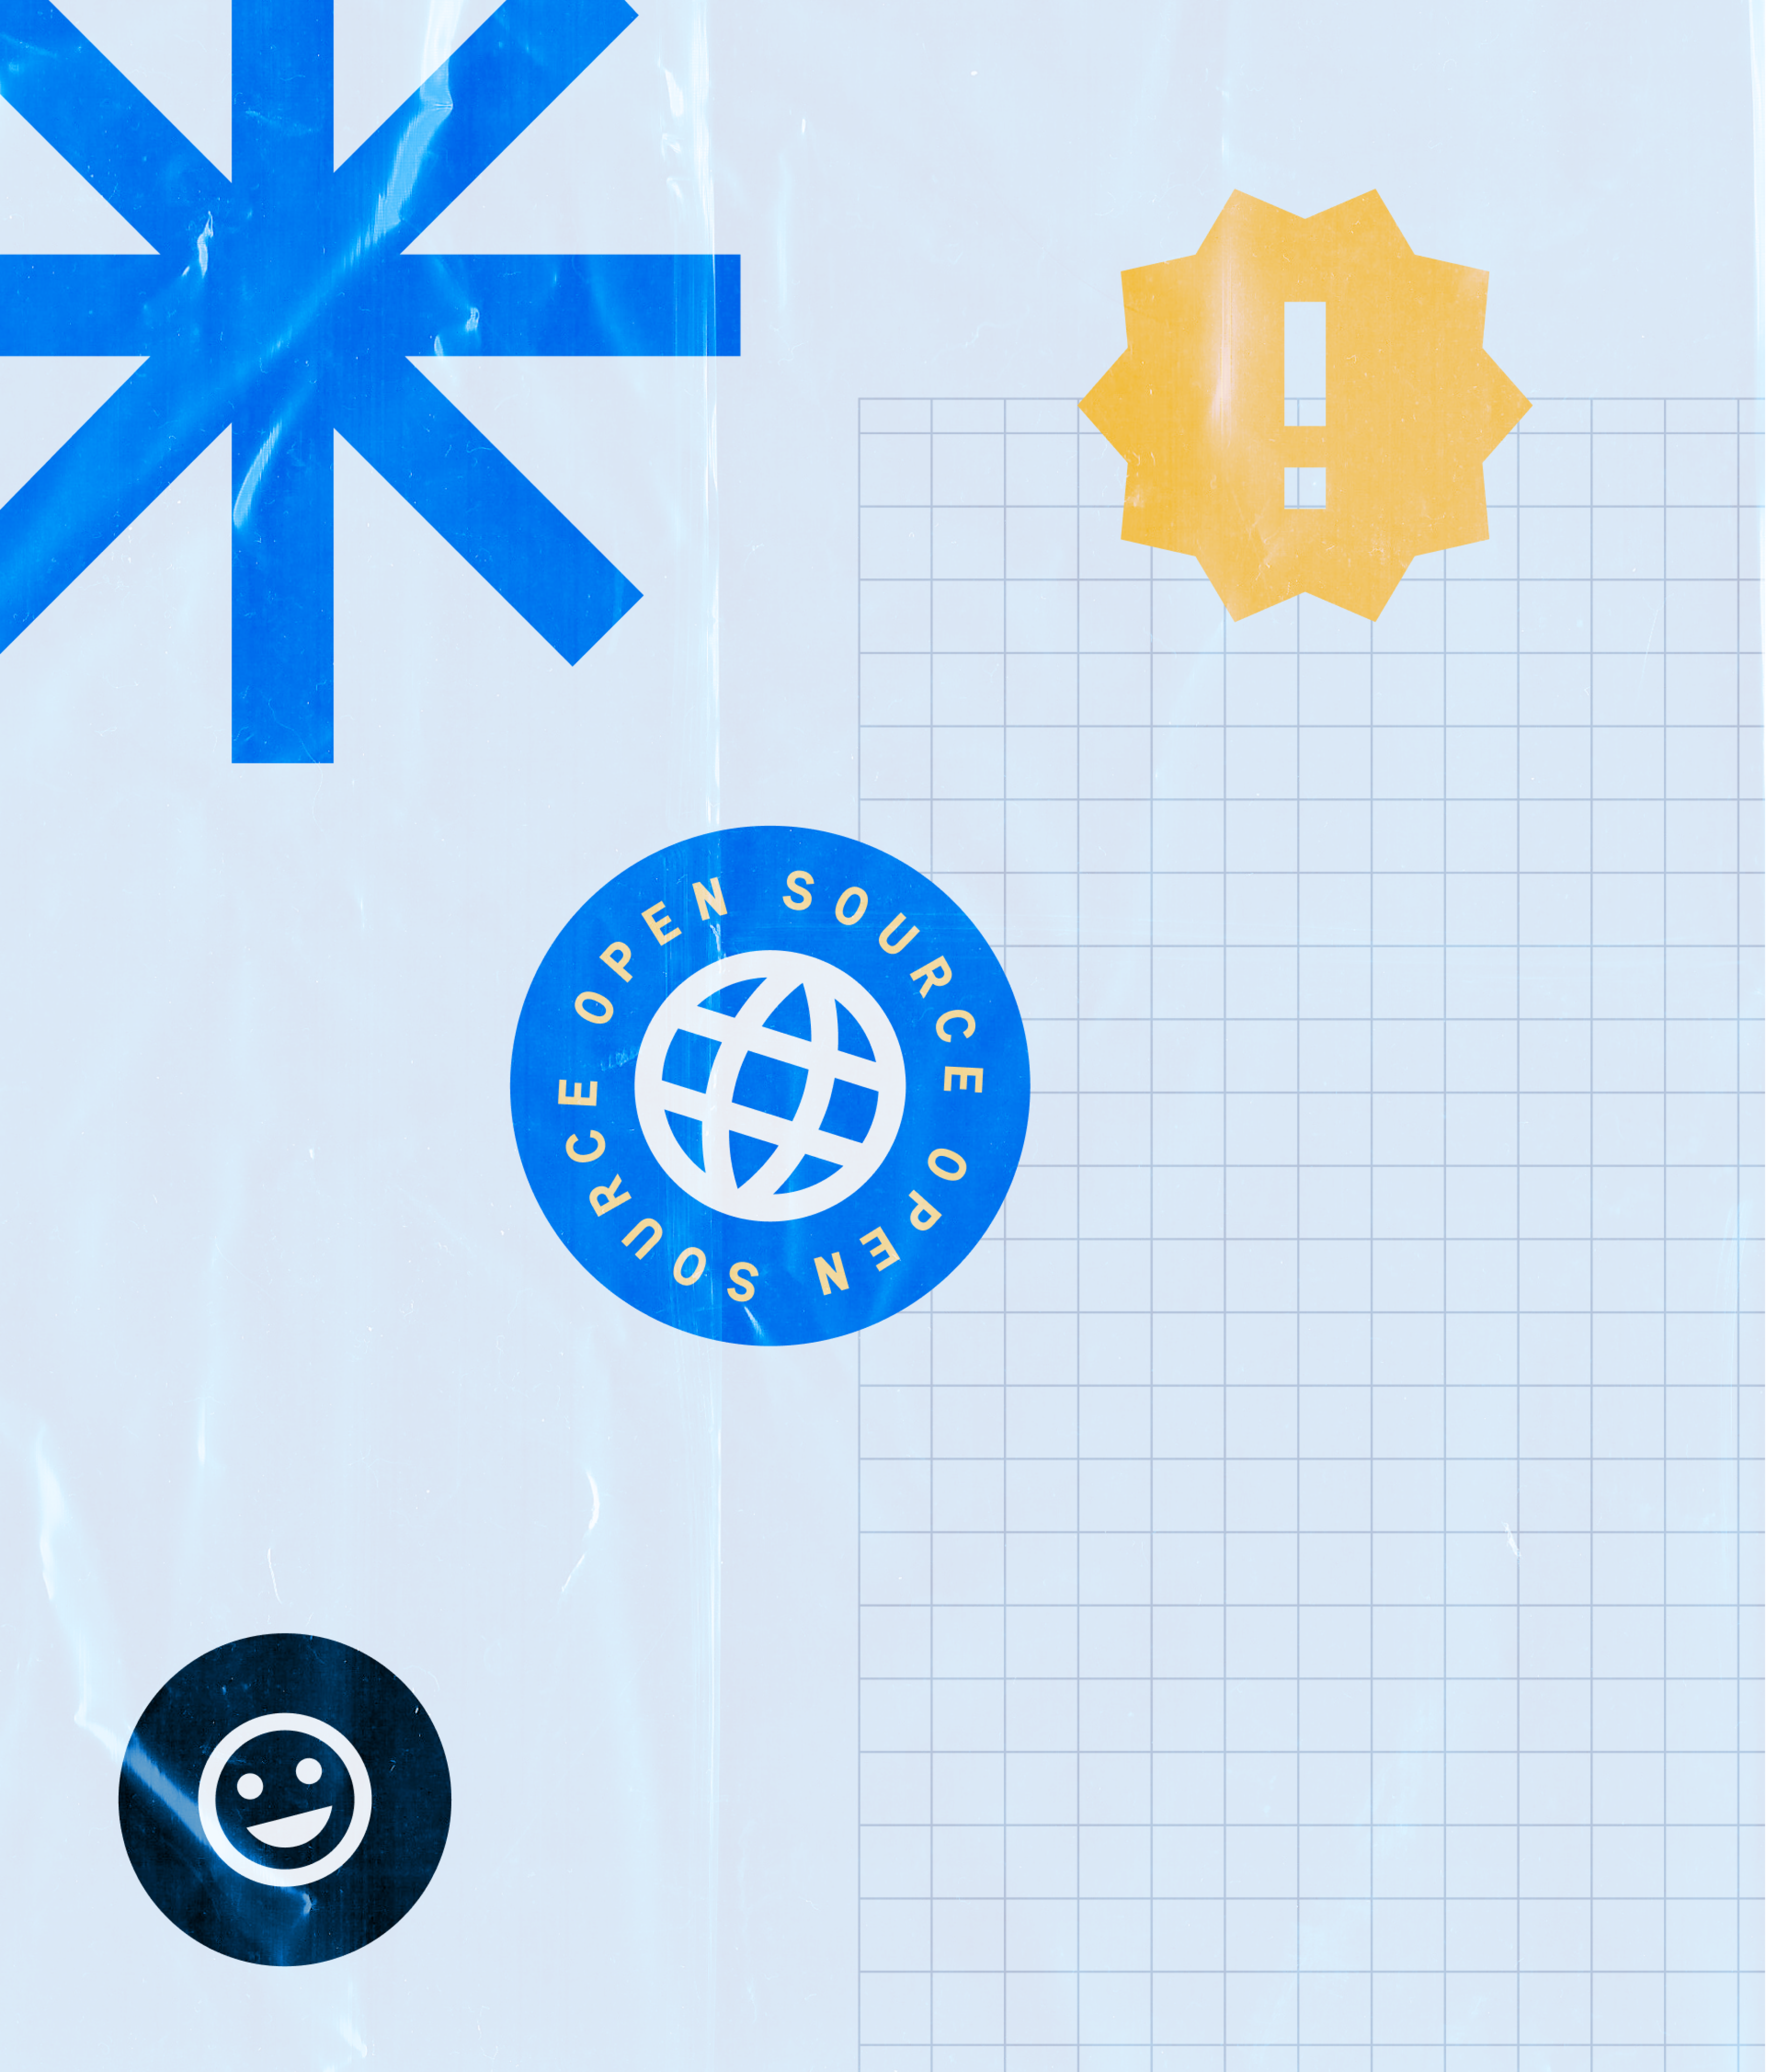 Asterisk, exclamation point, smiley face and "Open Source" stickers over a grid background